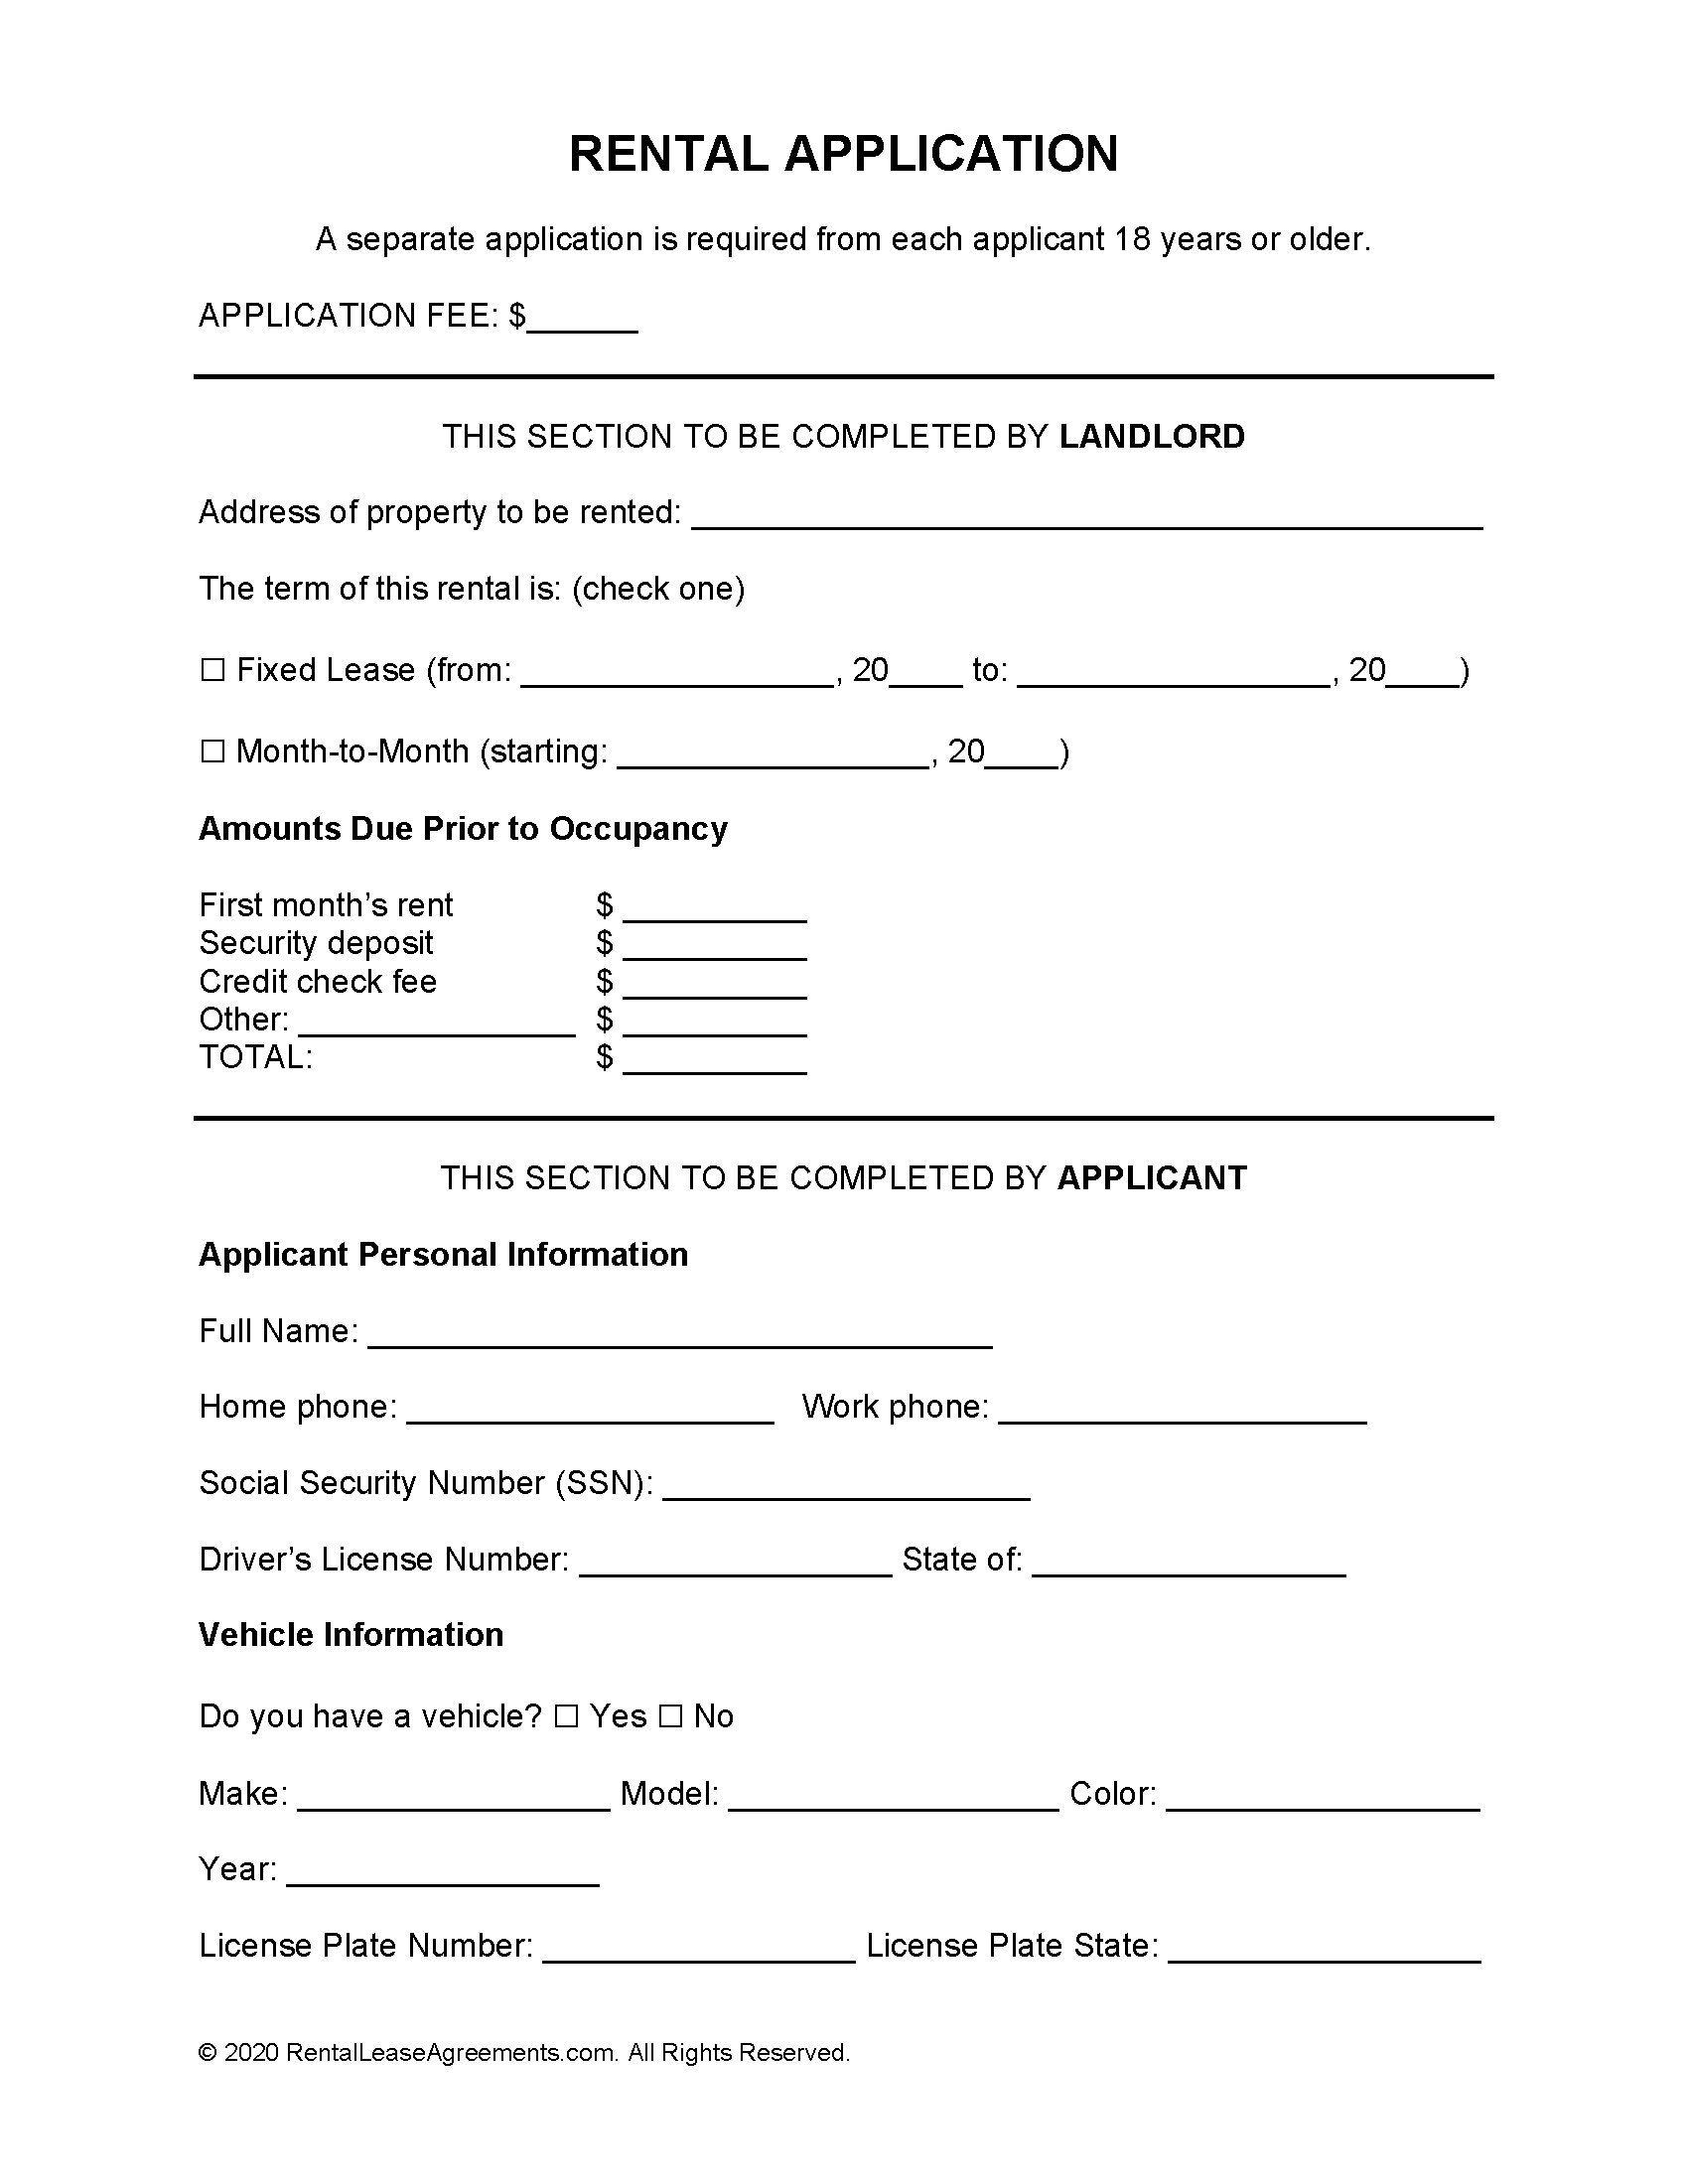 Free Rental Application Template - PDF - Word Inside zillow lease agreement template